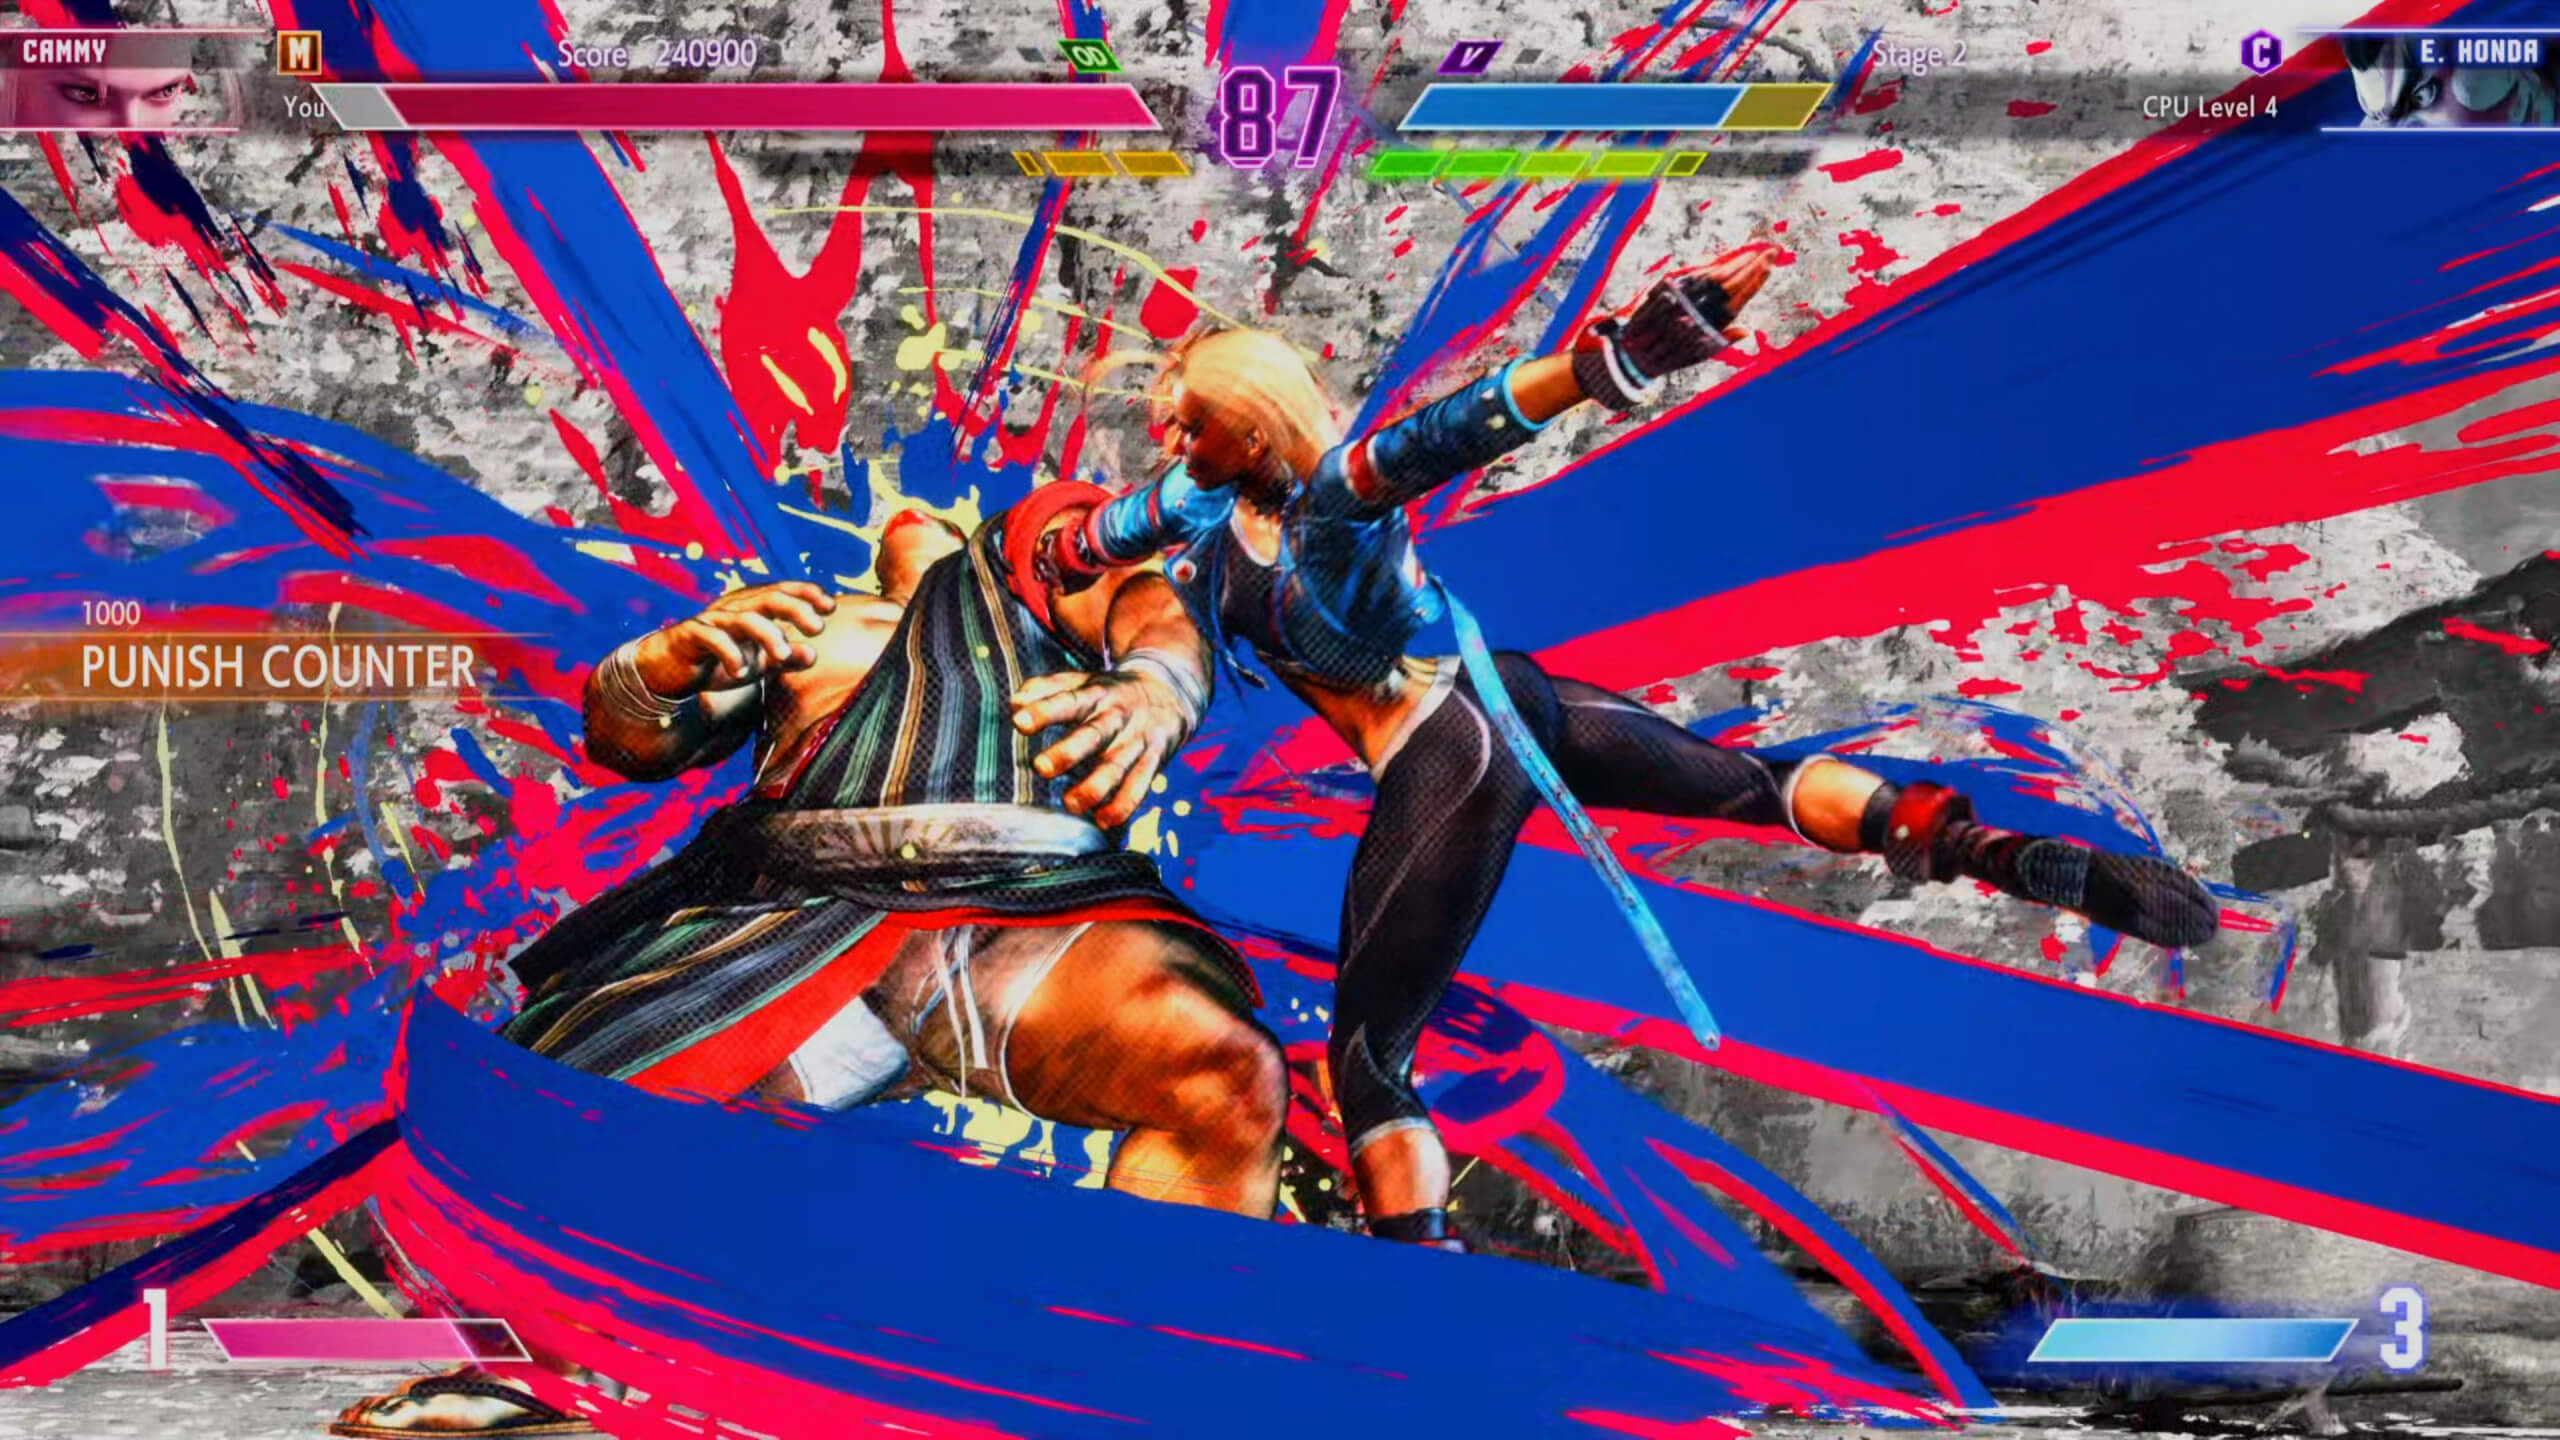 Cammy from Streetfighter 6 delivering a punish counter attack to E.Honda in an arcade mode match. The screen is emblazoned with with red and blue paint slashes to accentuate the special attack